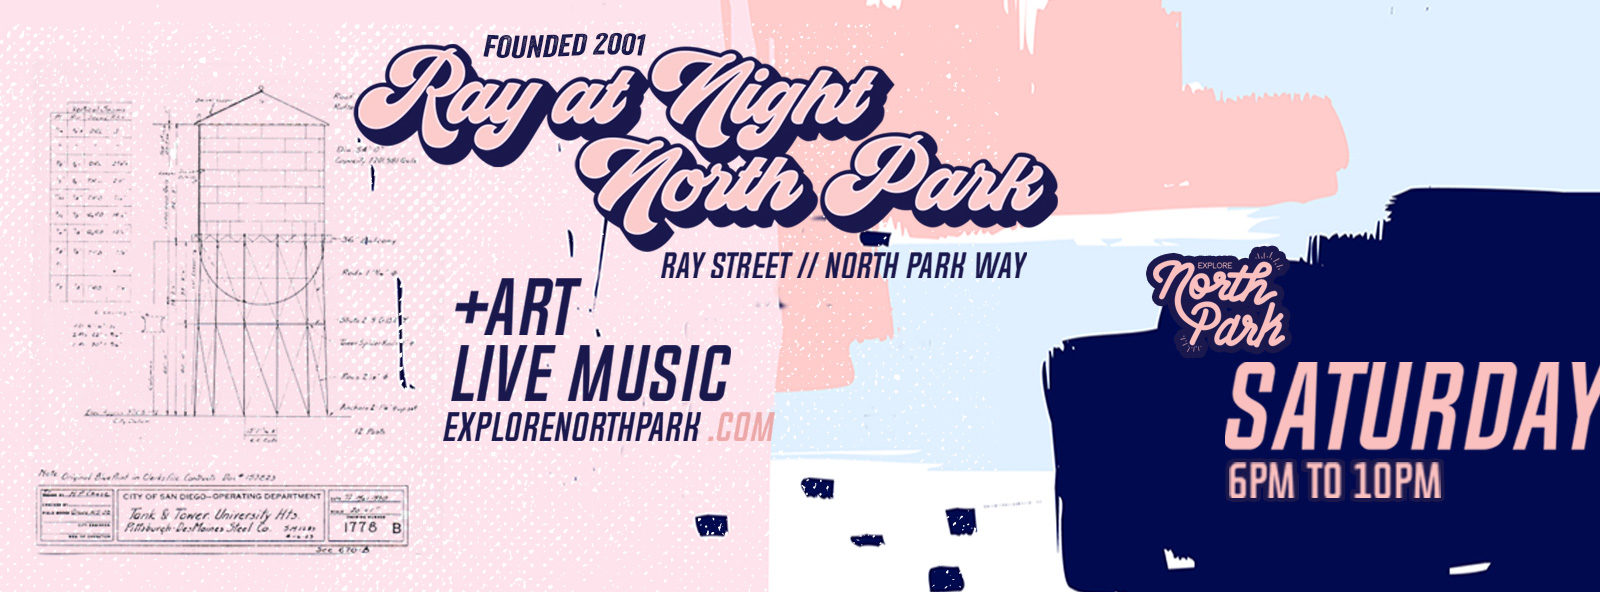 Fun Events in North Park North Park Main Street